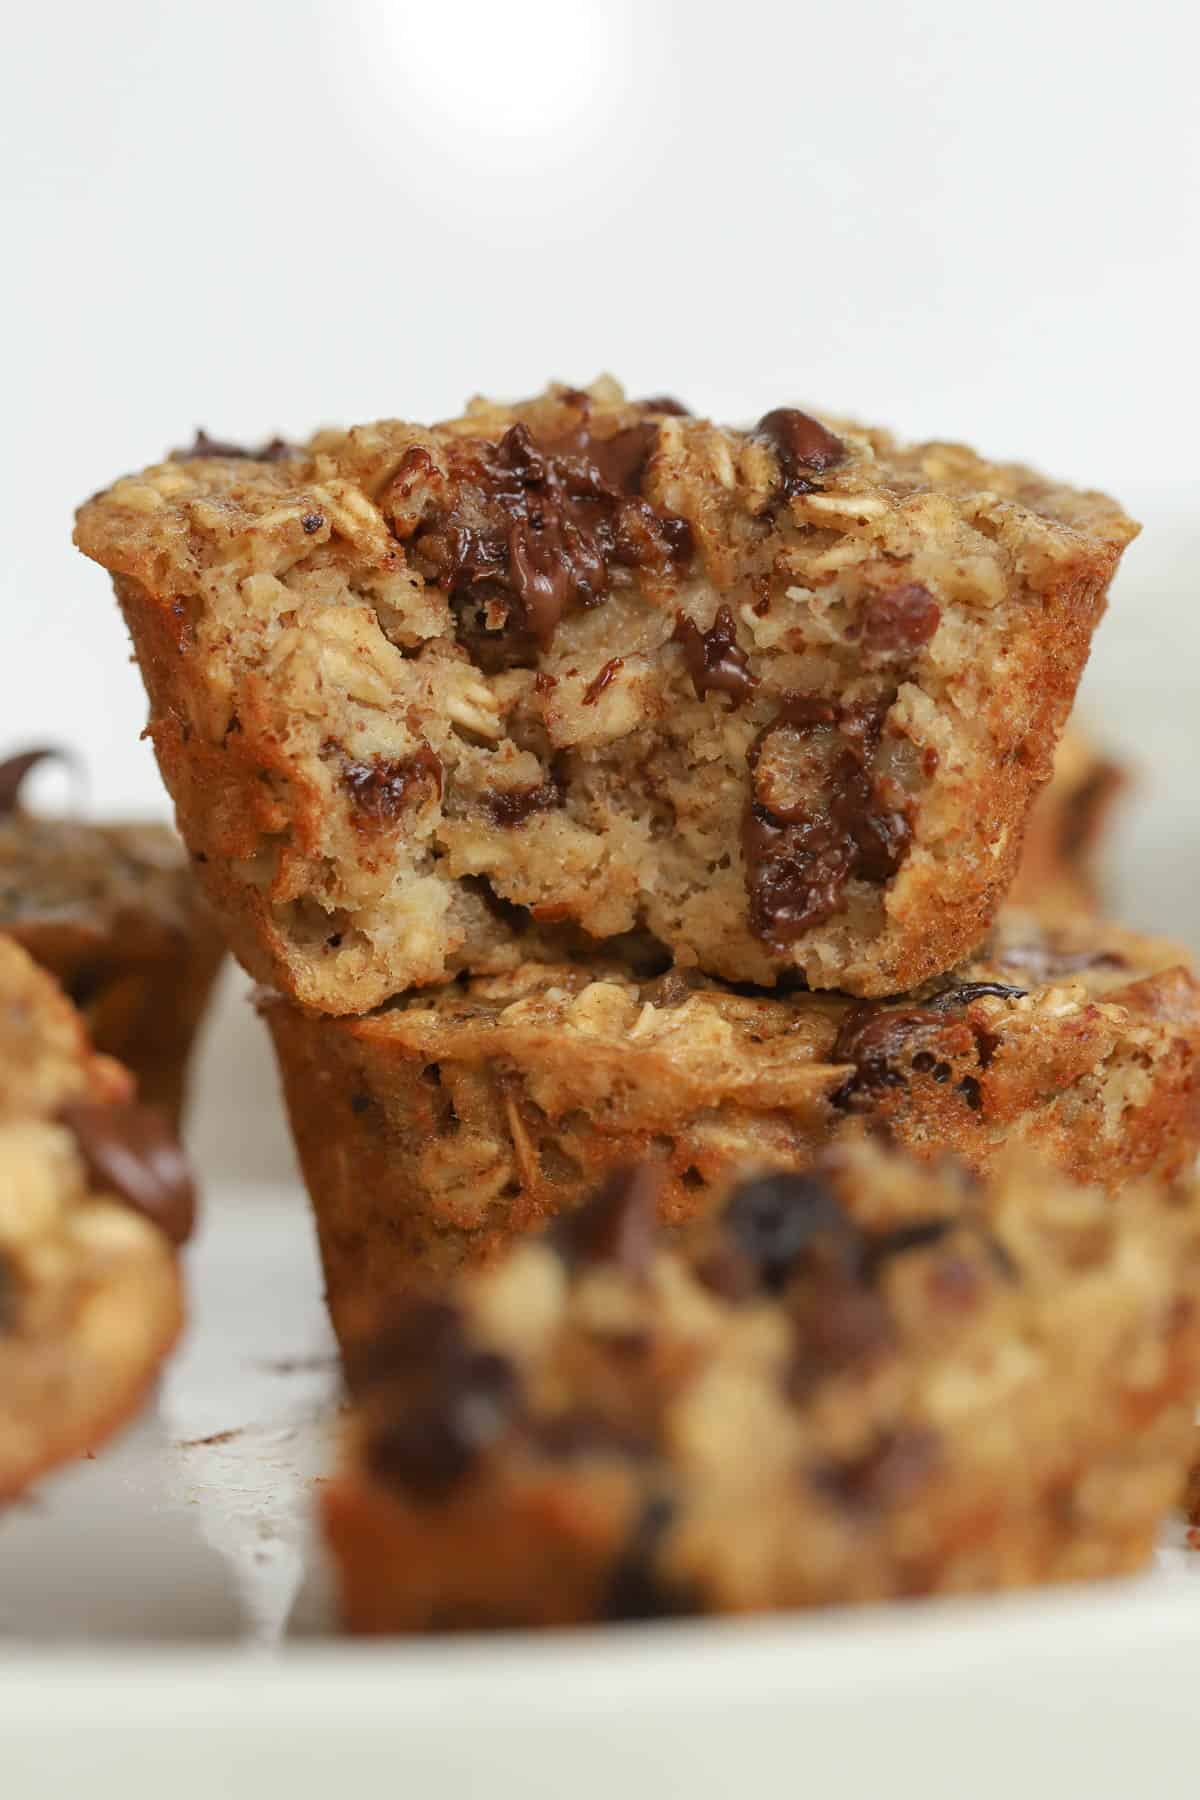 Stack of two baked oatmeal cups filled with chocolate chips.